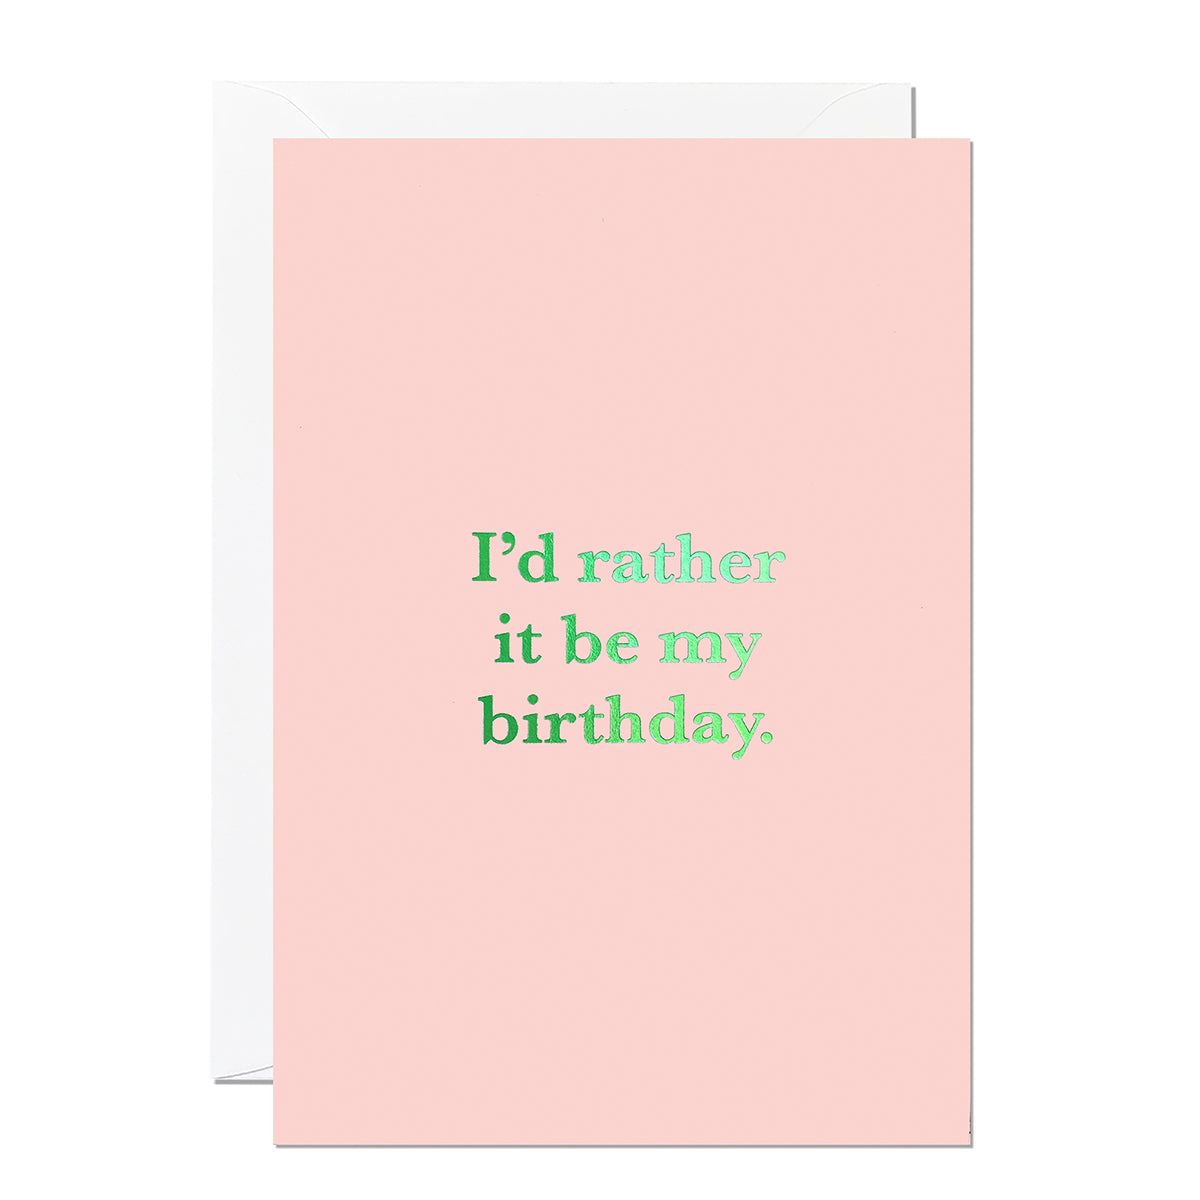 This funny birthday card says 'I'd rather it be my birthday' and is printed on a pink background with a green hot foil.